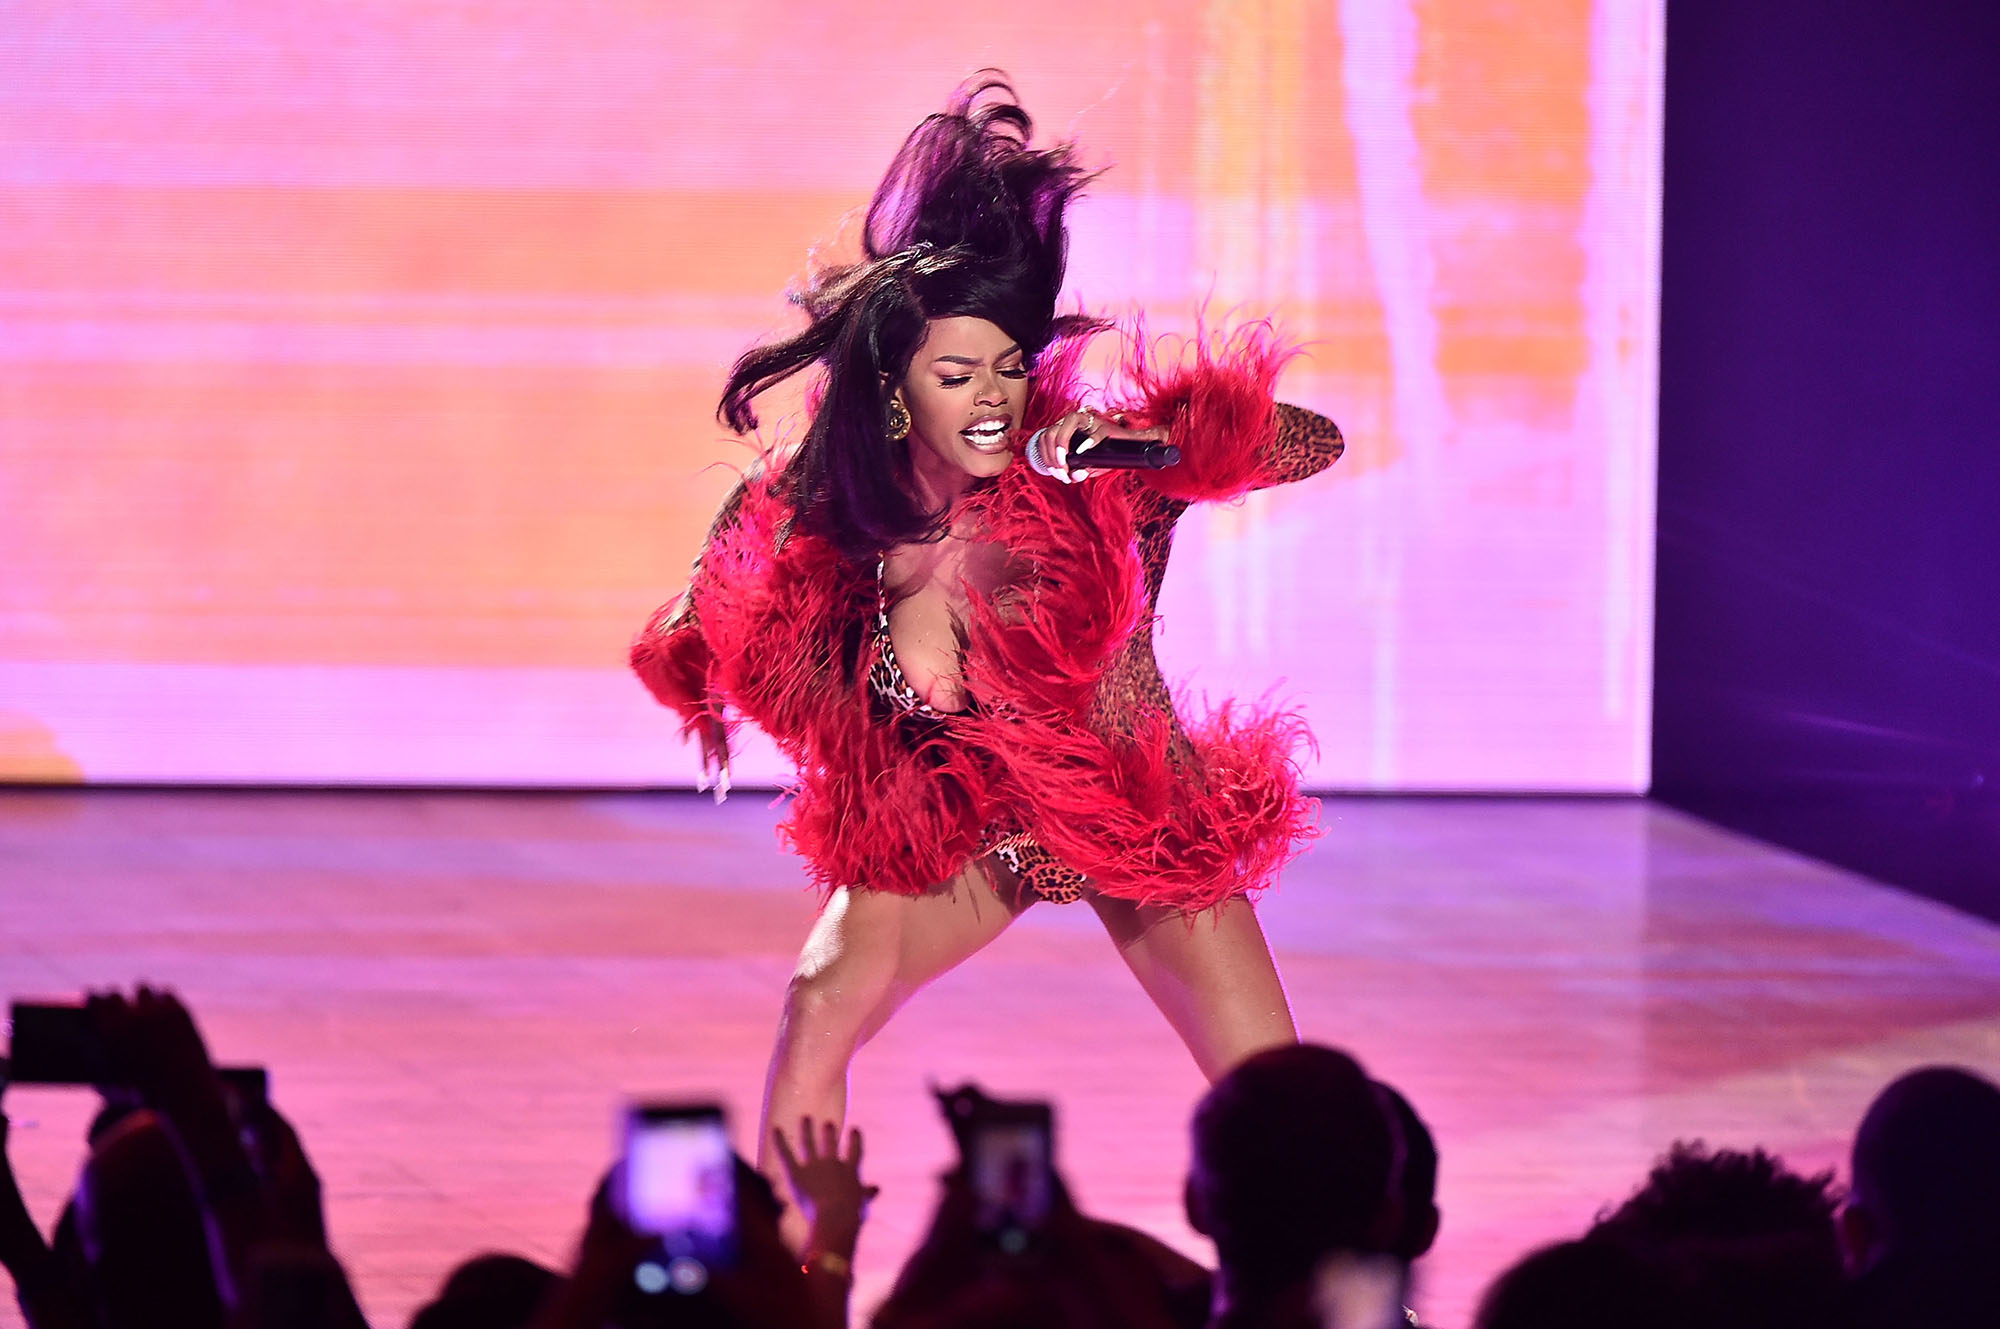 Teyana Taylor performs onstage during the VH1 Hip Hop Honors: All Hail The Queens at David Geffen Hall on July 11, 2016 in New York City.  (Photo by Theo Wargo/Getty Images for VH1) (Theo Wargo&mdash;Getty Images for VH1)